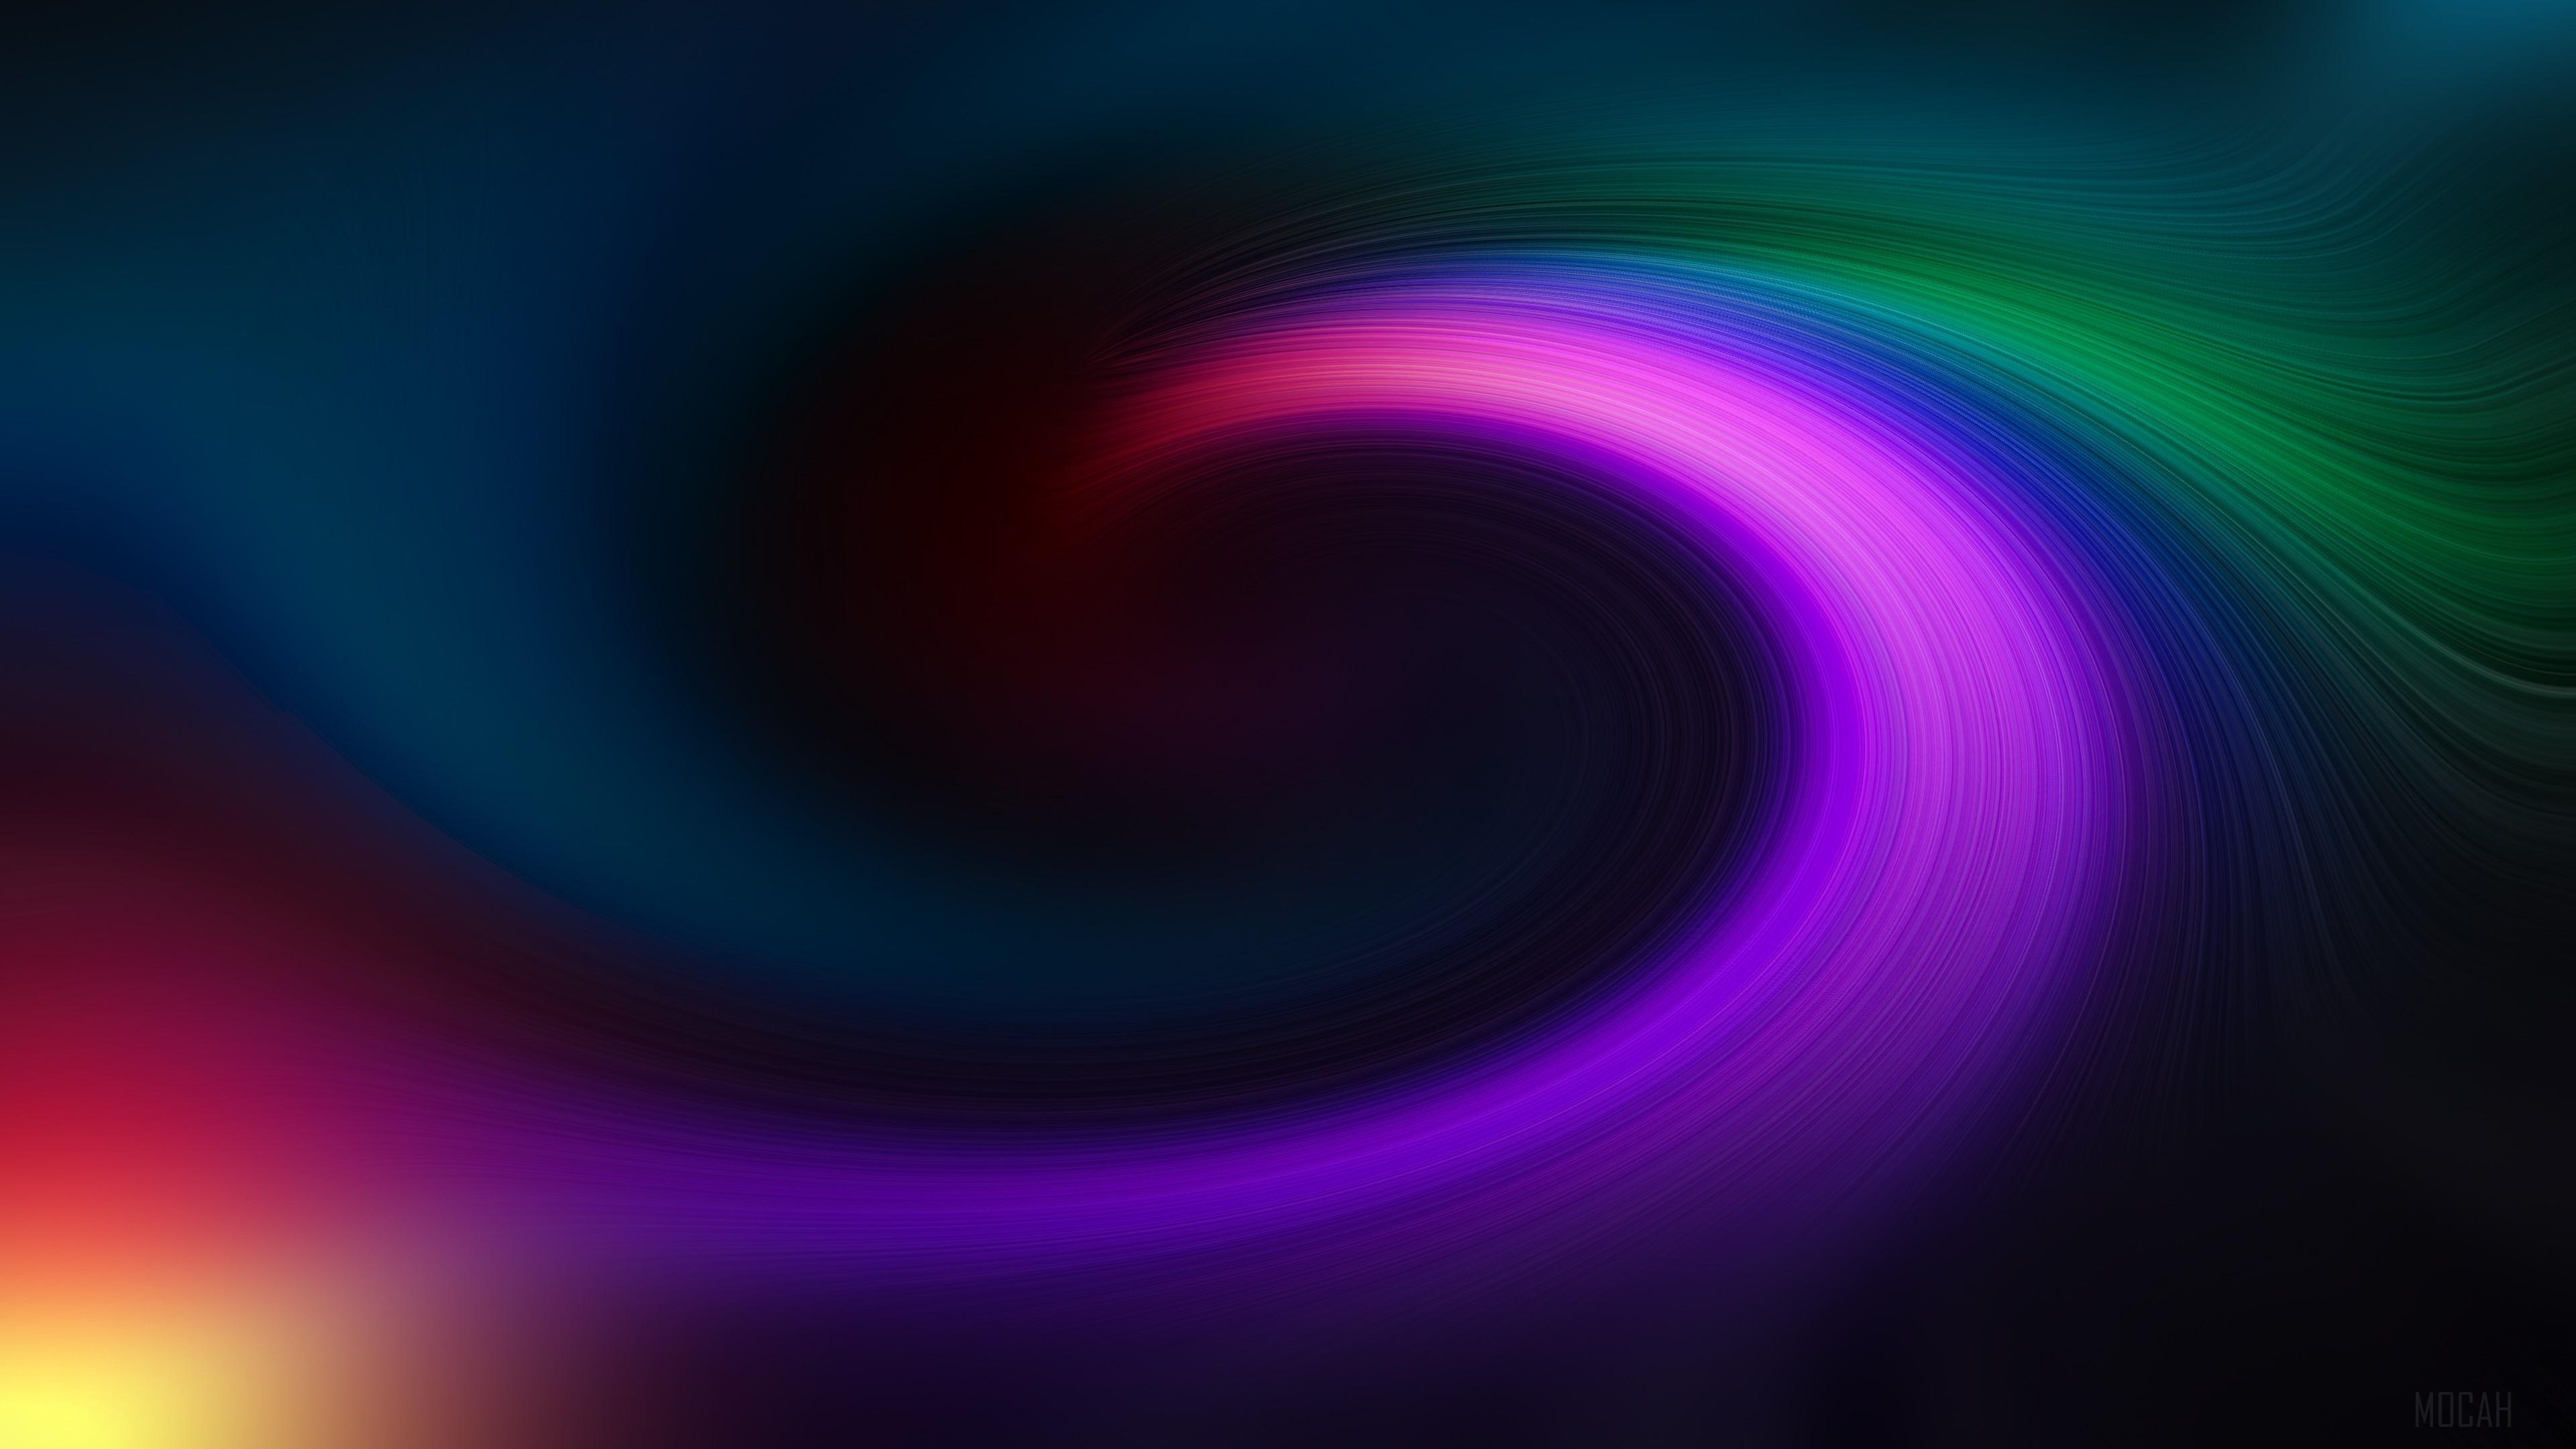 HD wallpaper, Spiral Moving Colors Abstract 4K